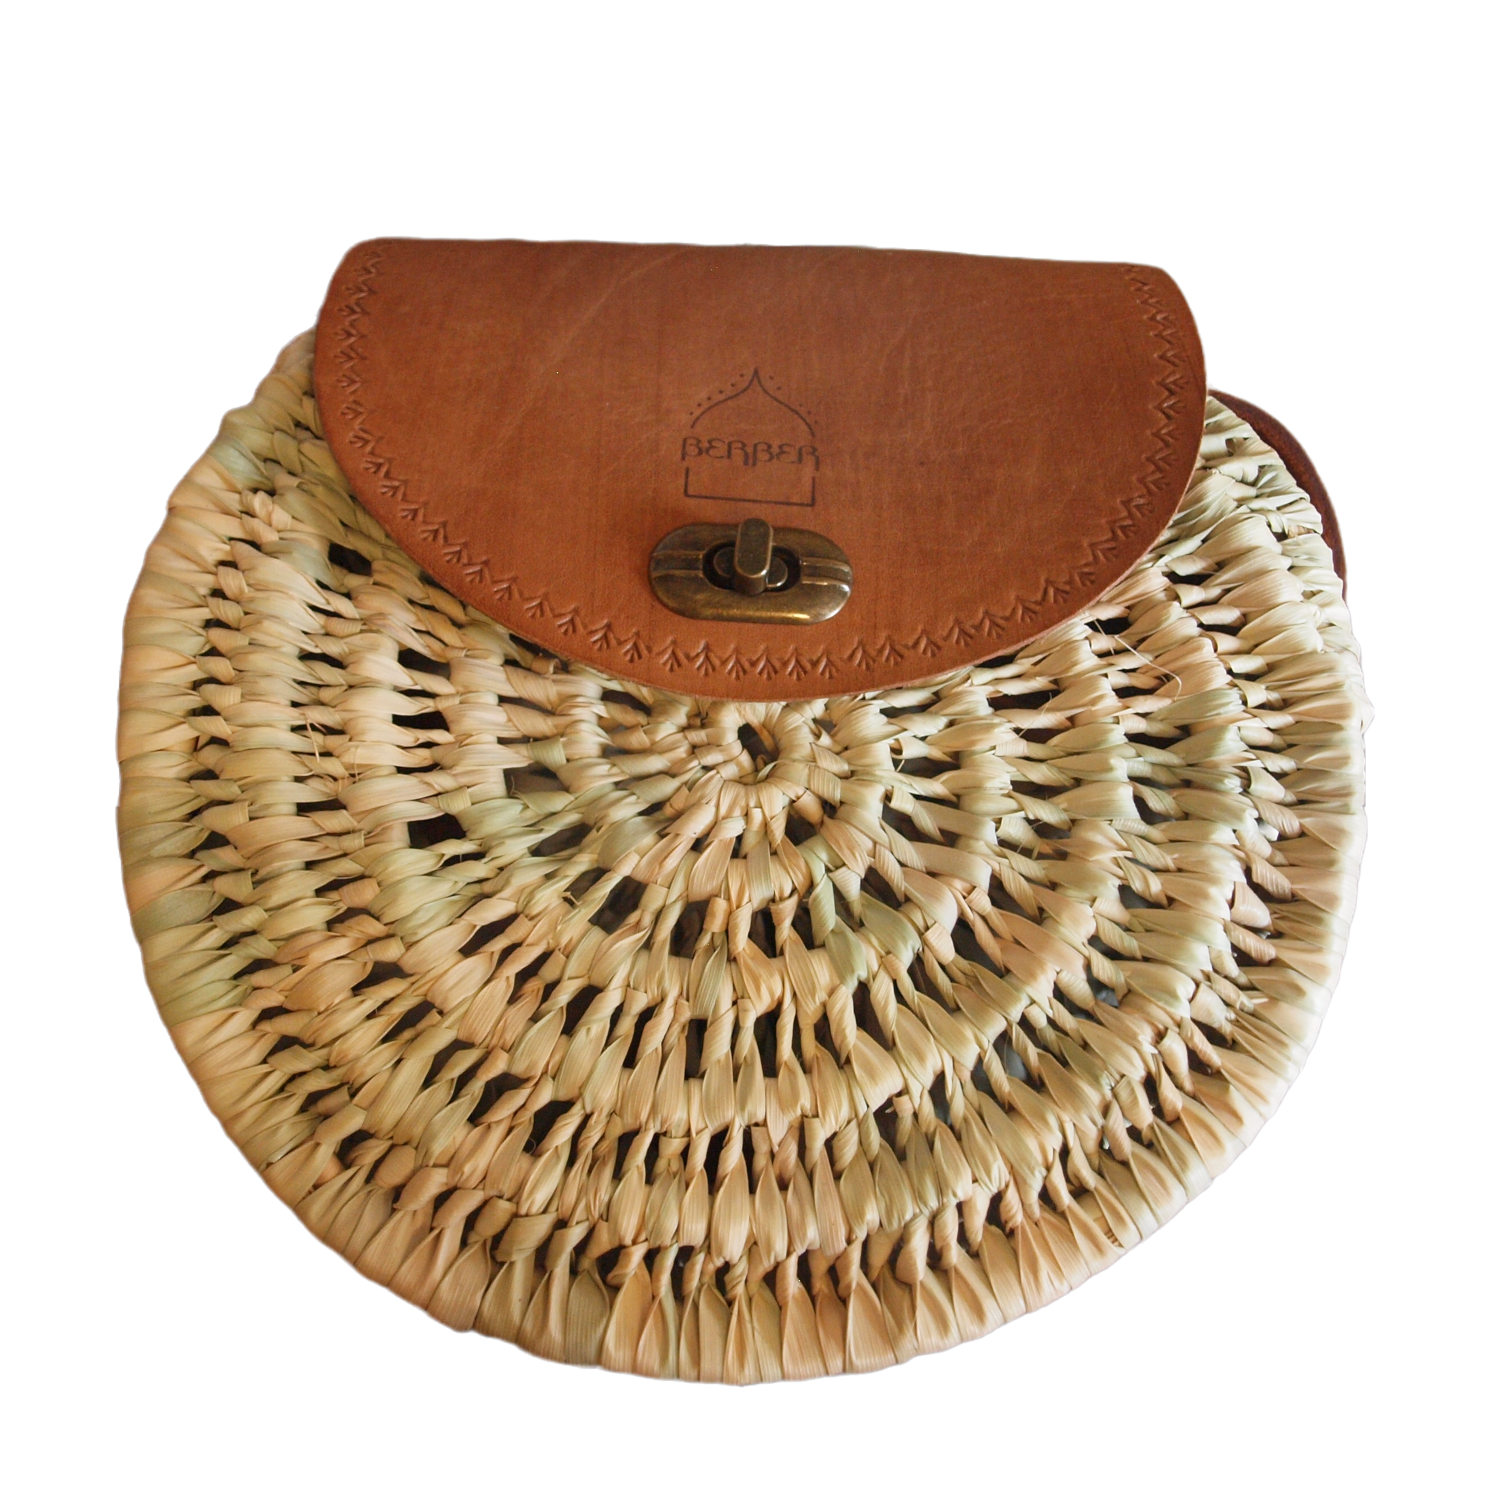 The Safi Rattan Round Bag - Loose Weave on White Background